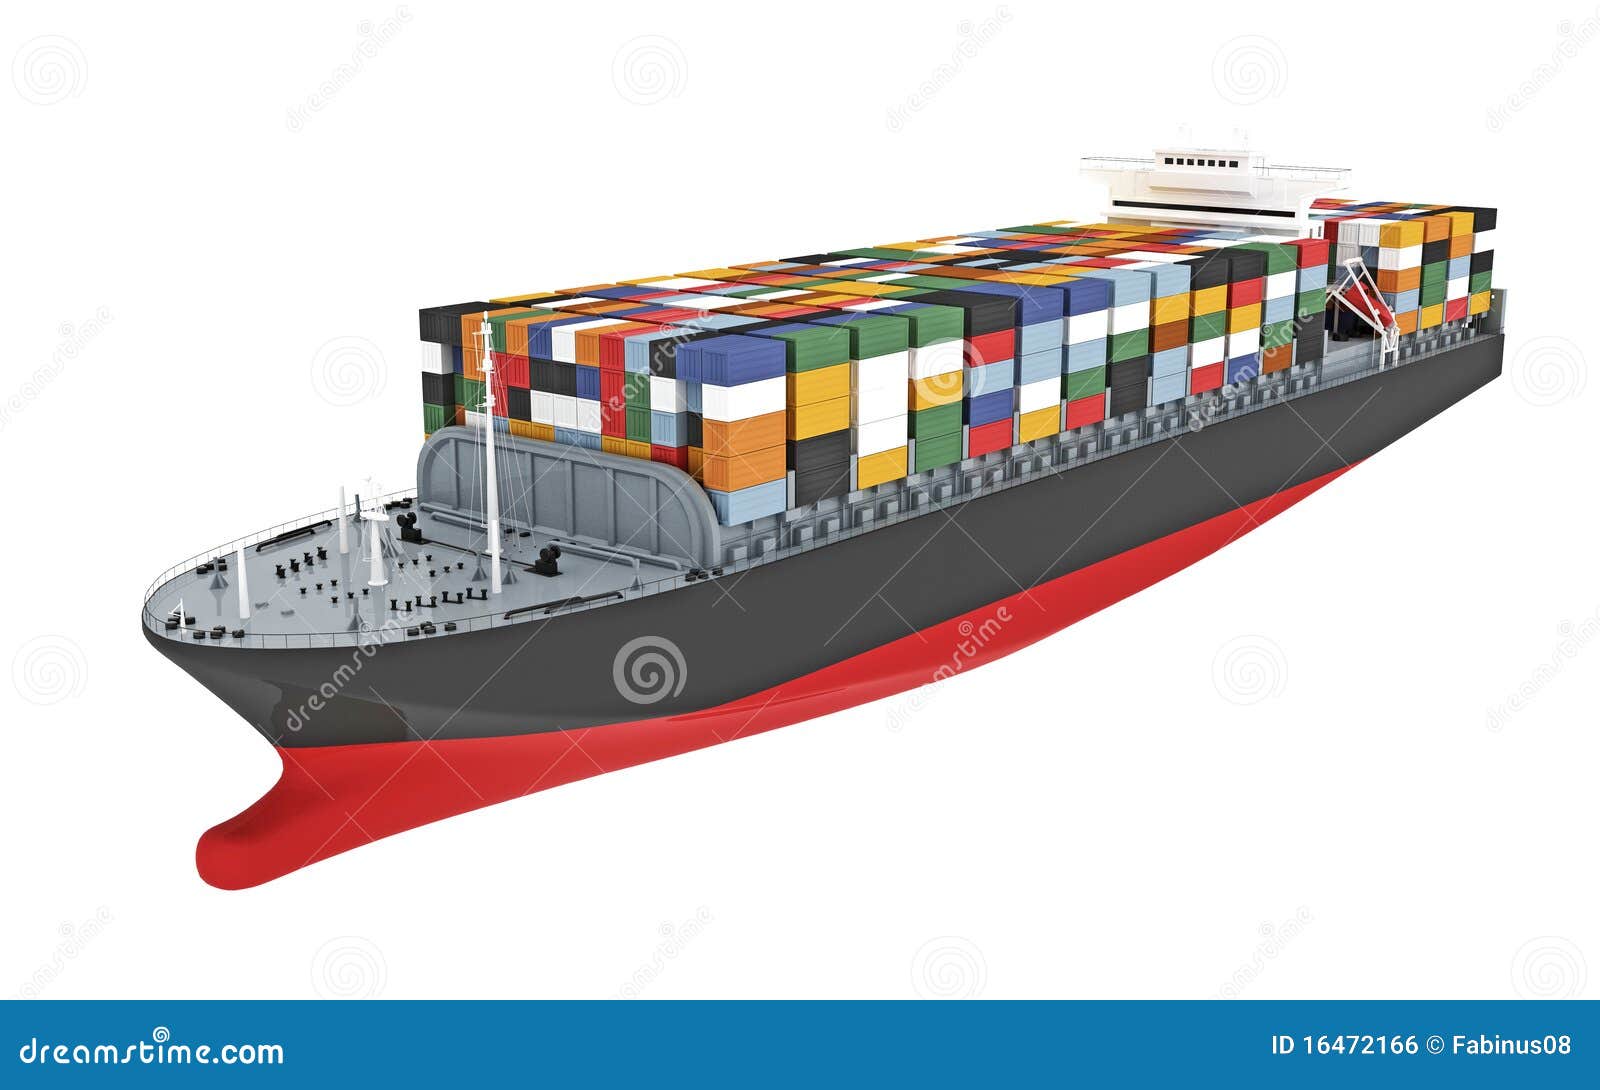 container ship clipart - photo #27